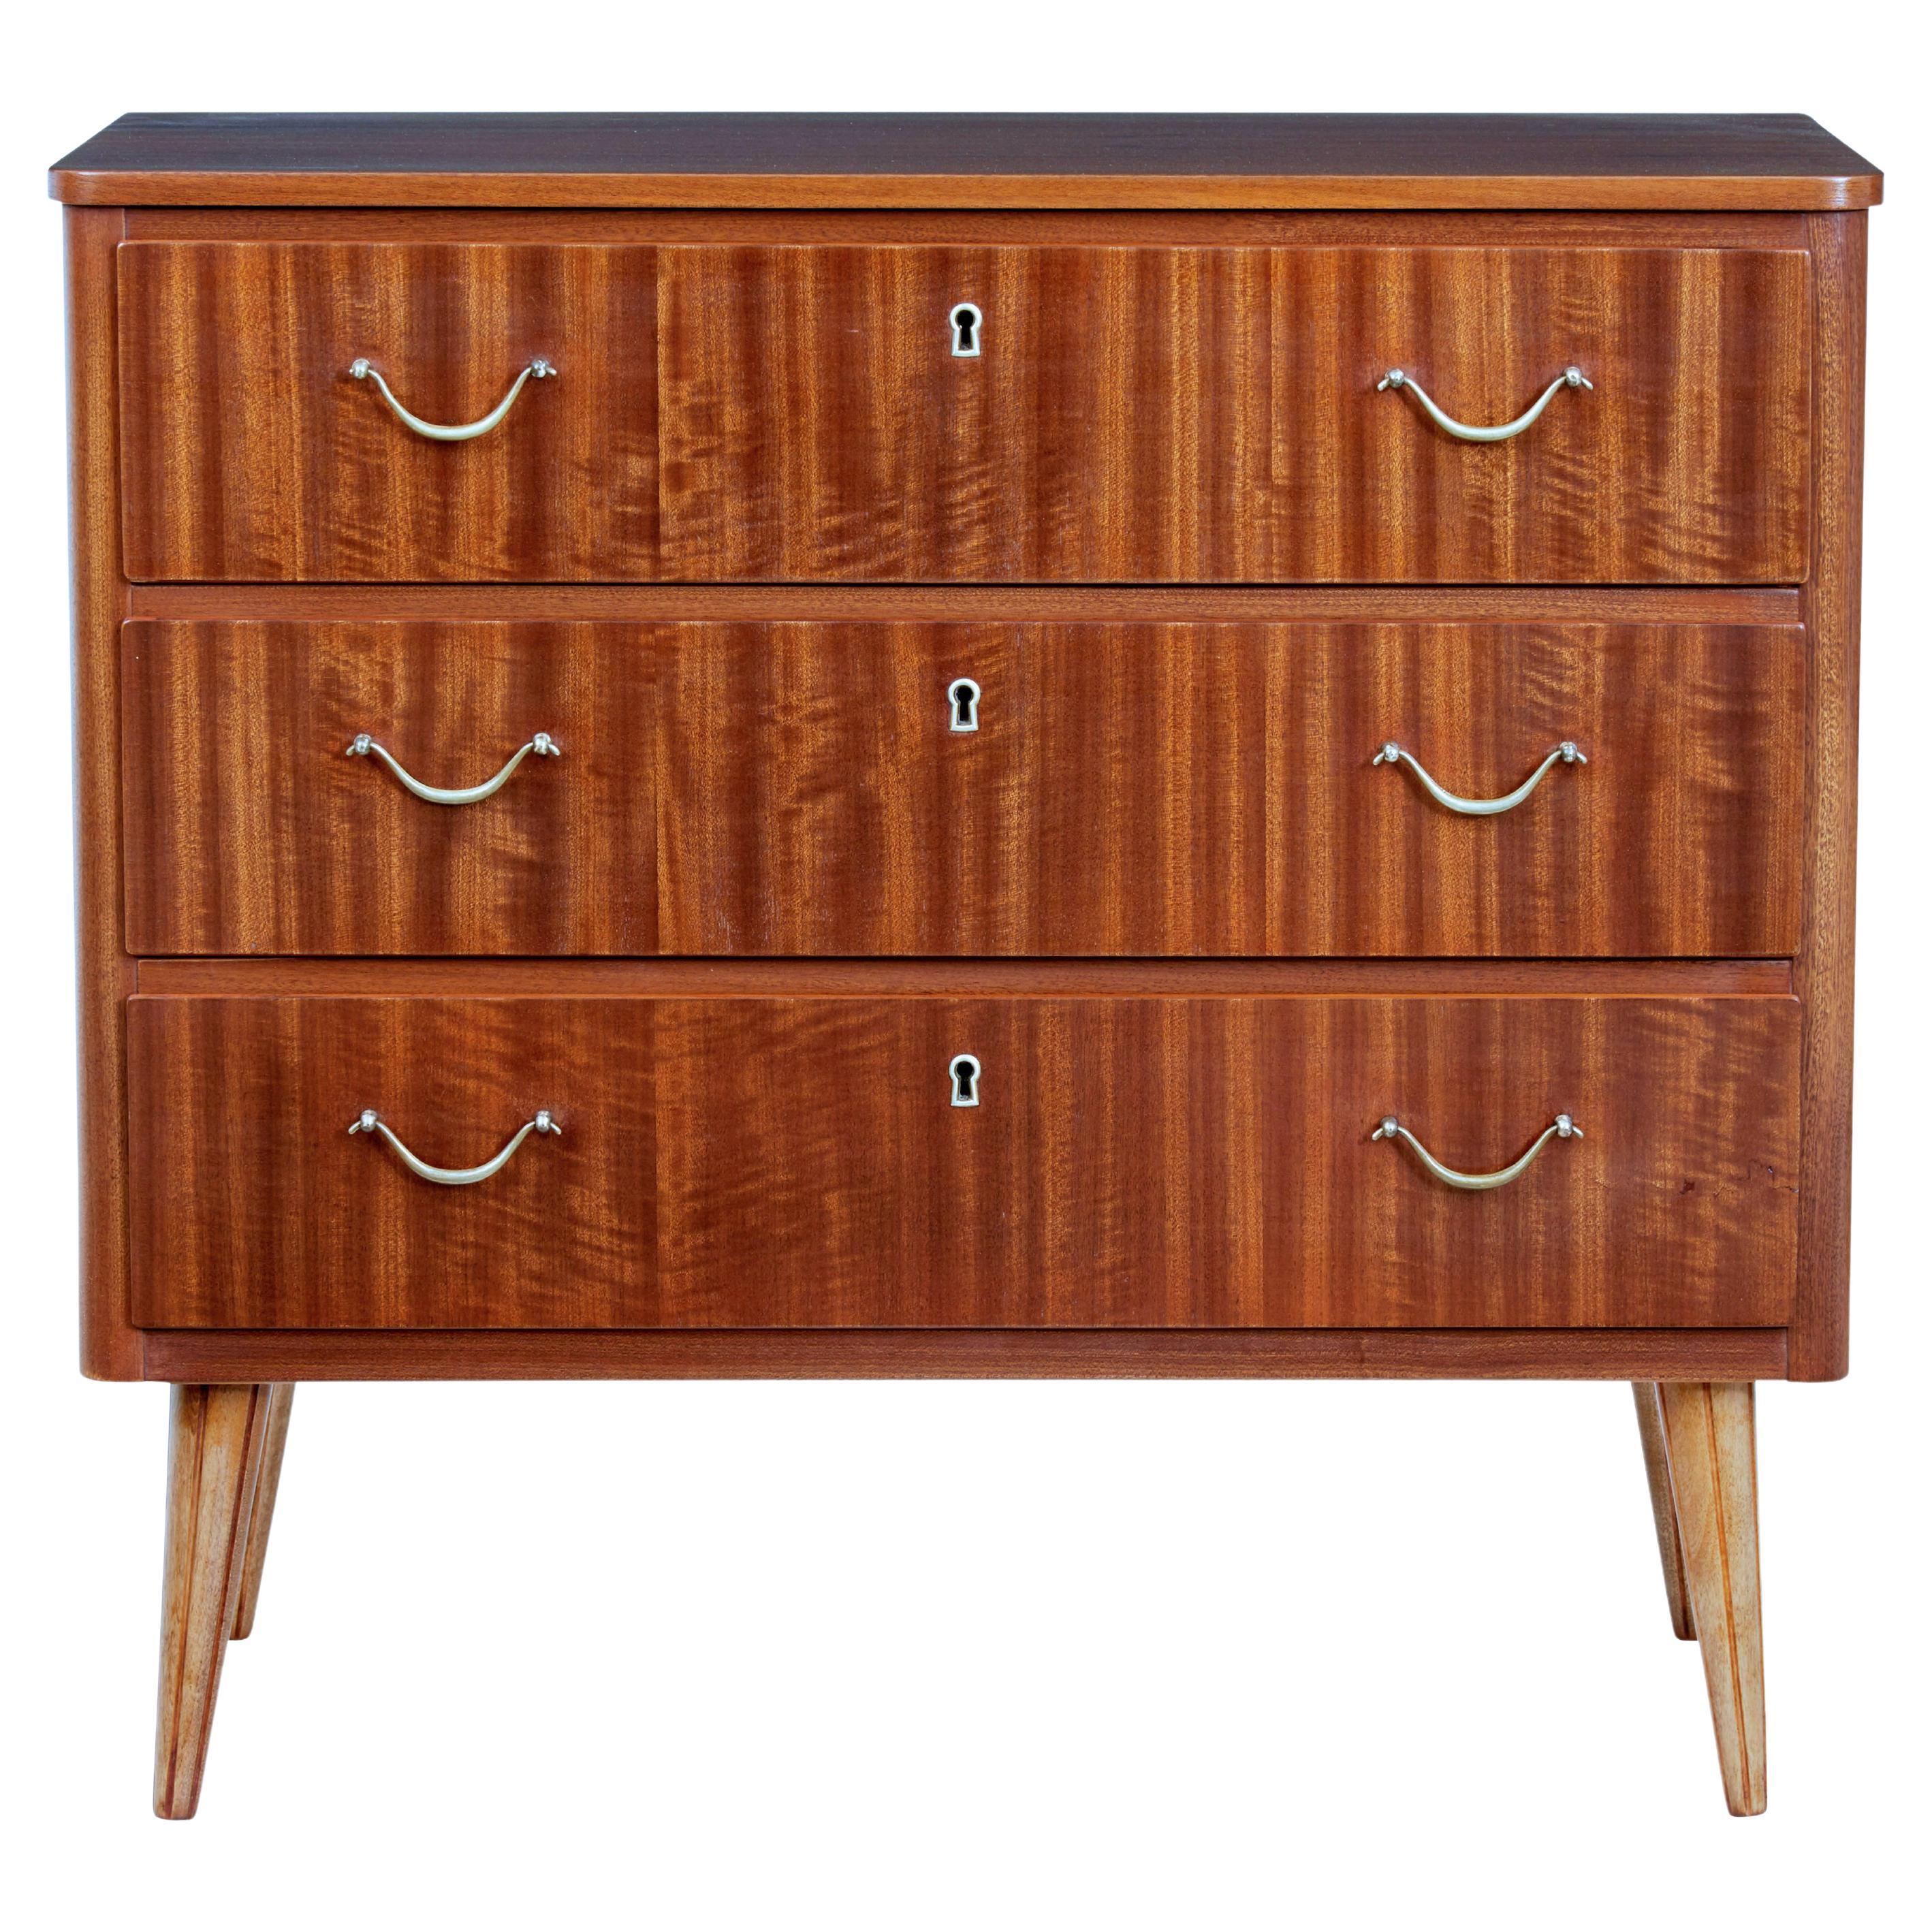 Mid 20th century Danish small teak chest of drawers For Sale